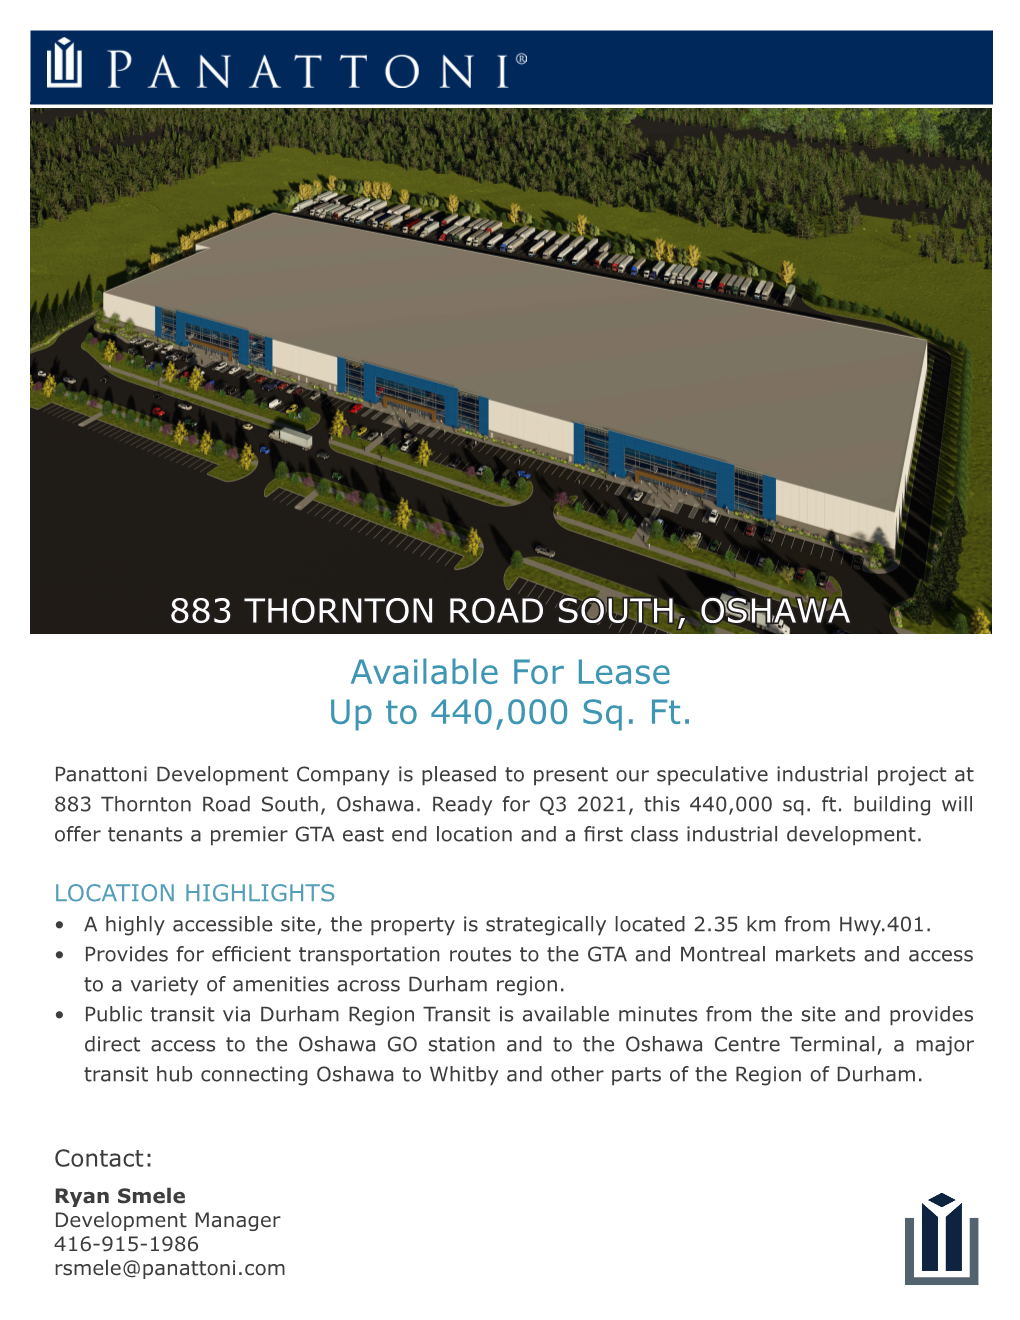 883 THORNTON ROAD SOUTH, OSHAWA Available for Lease up to 440,000 Sq